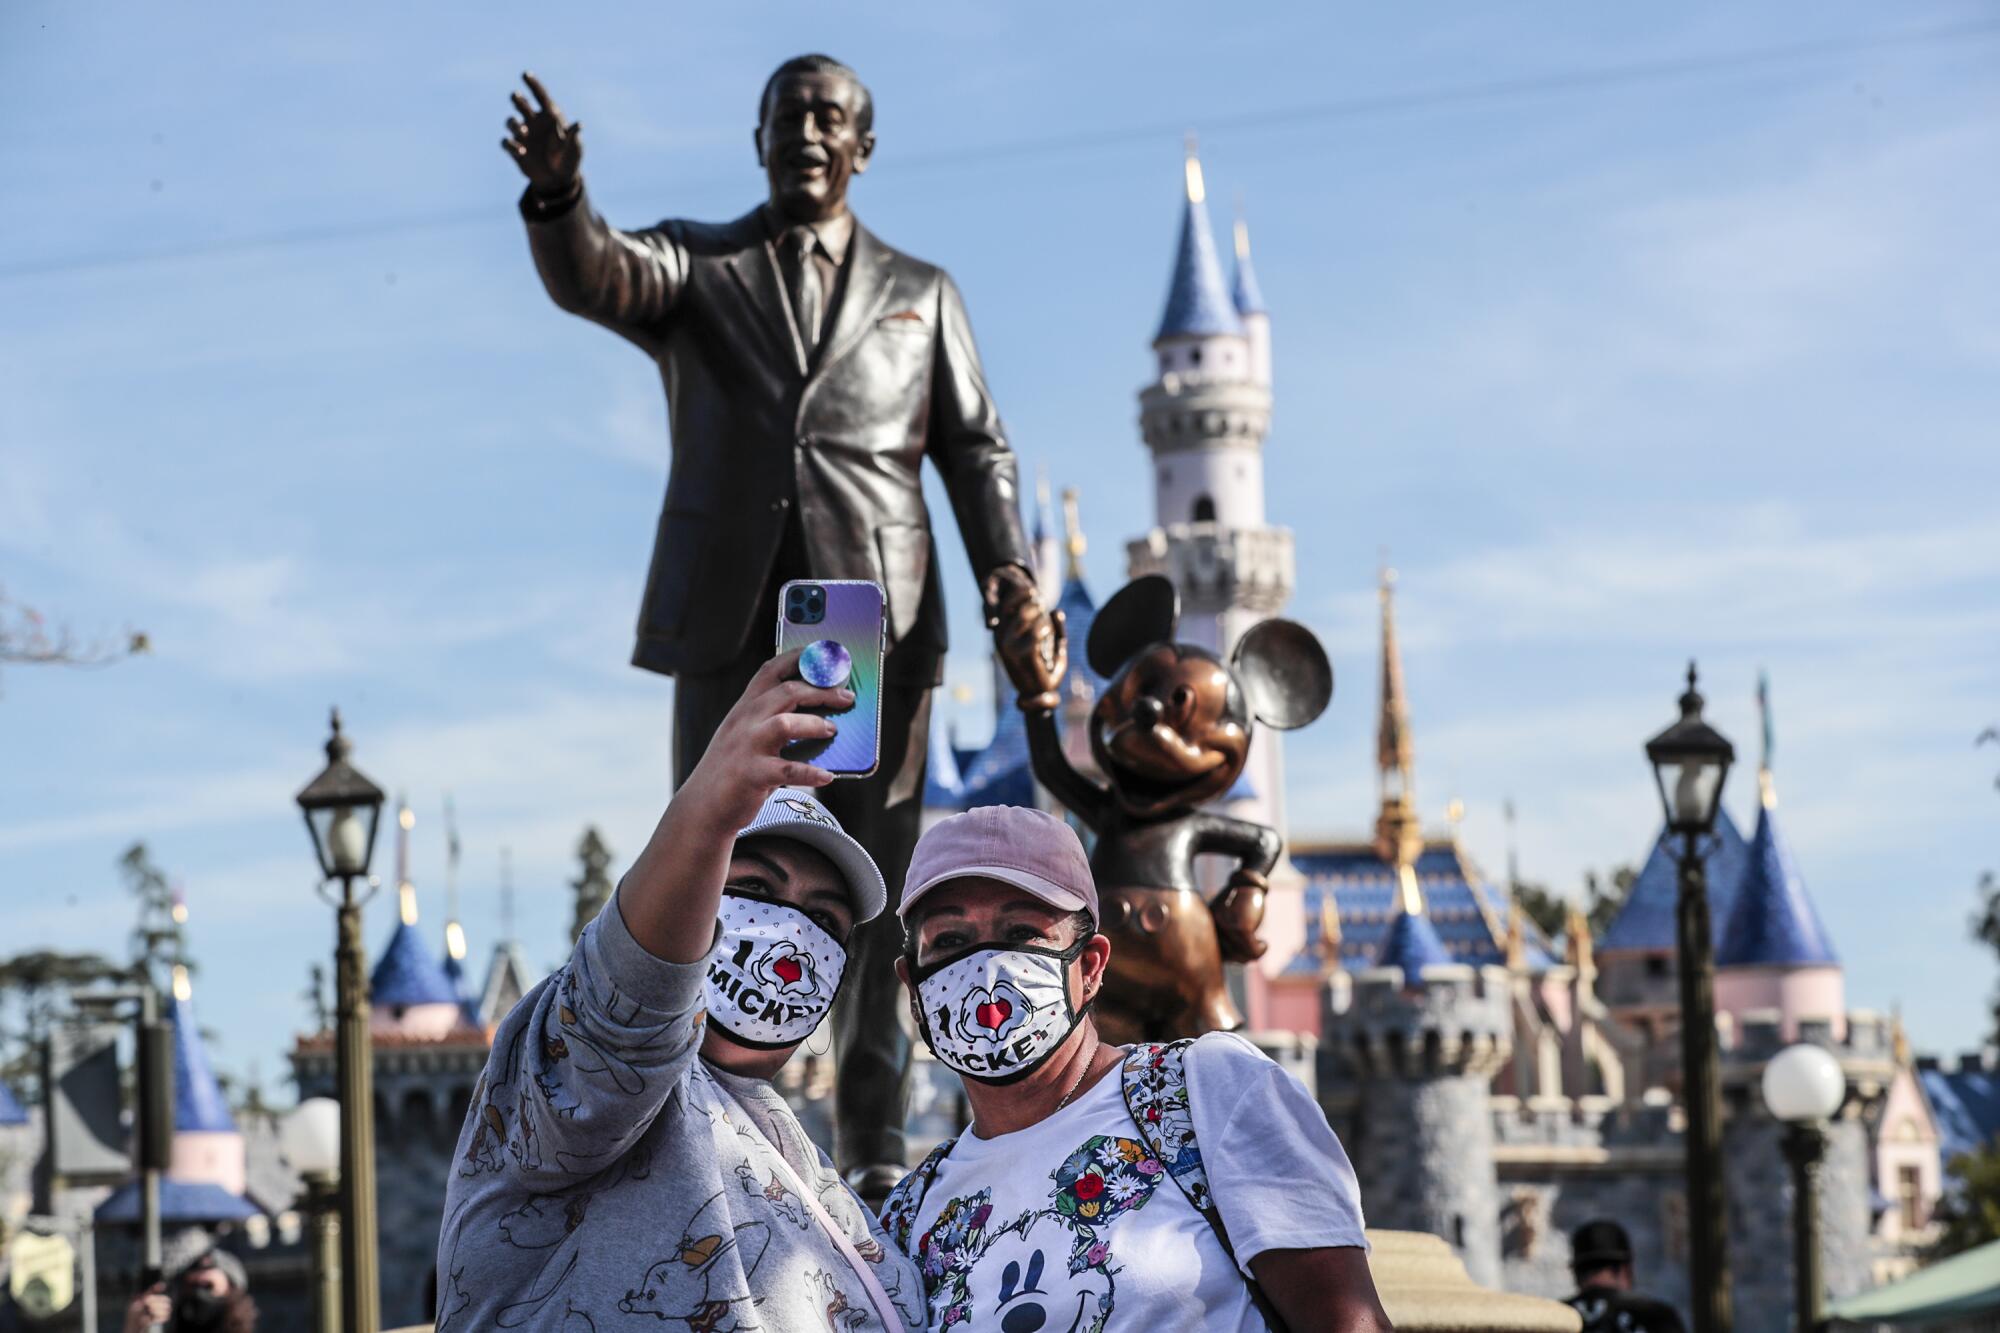 Visitors take a selfie with the Walt Disney statue in front of Sleeping Beauty's Castle at Disneyland.